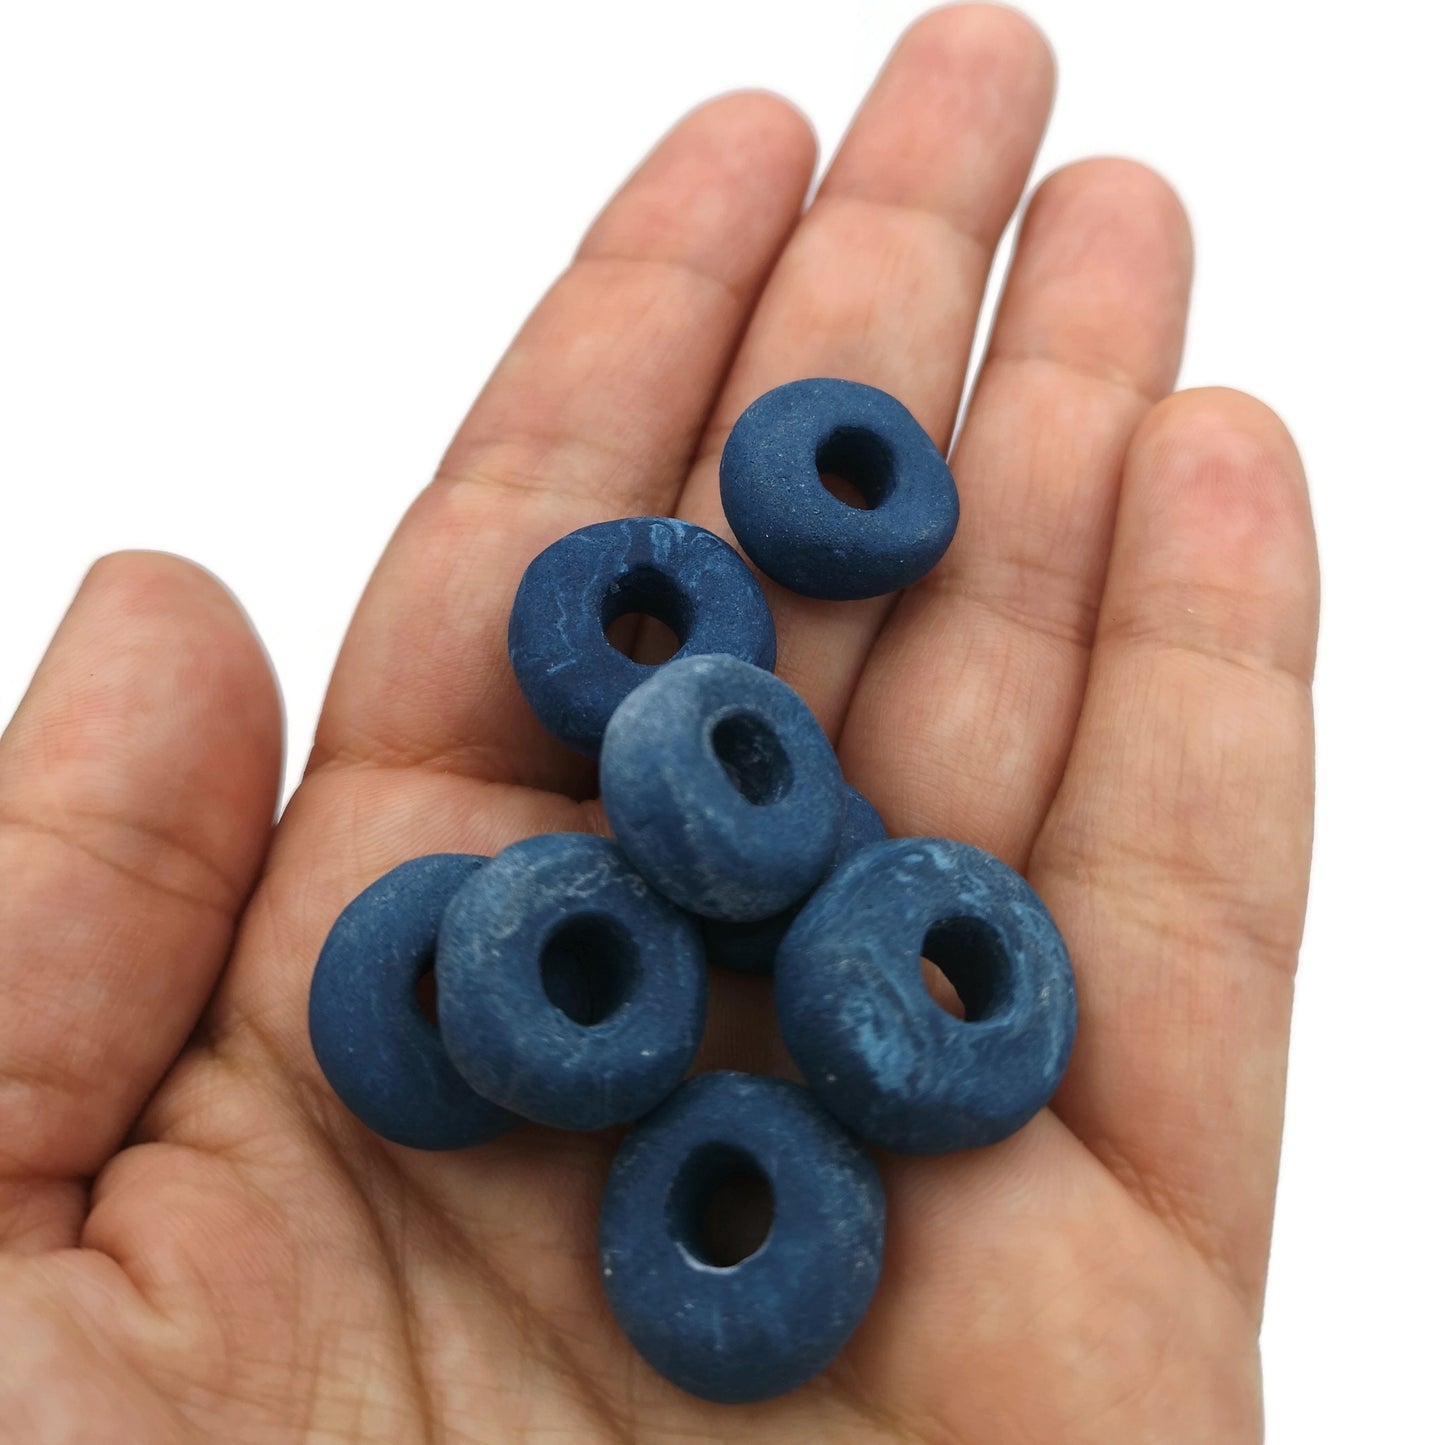 CERAMIC TUBE BEADS, Macrame Beads, Clay Spacer Beads, Set of 8 Craft Beads For Jewerlry Making, Long Tube Beads With Large Hole - Ceramica Ana Rafael